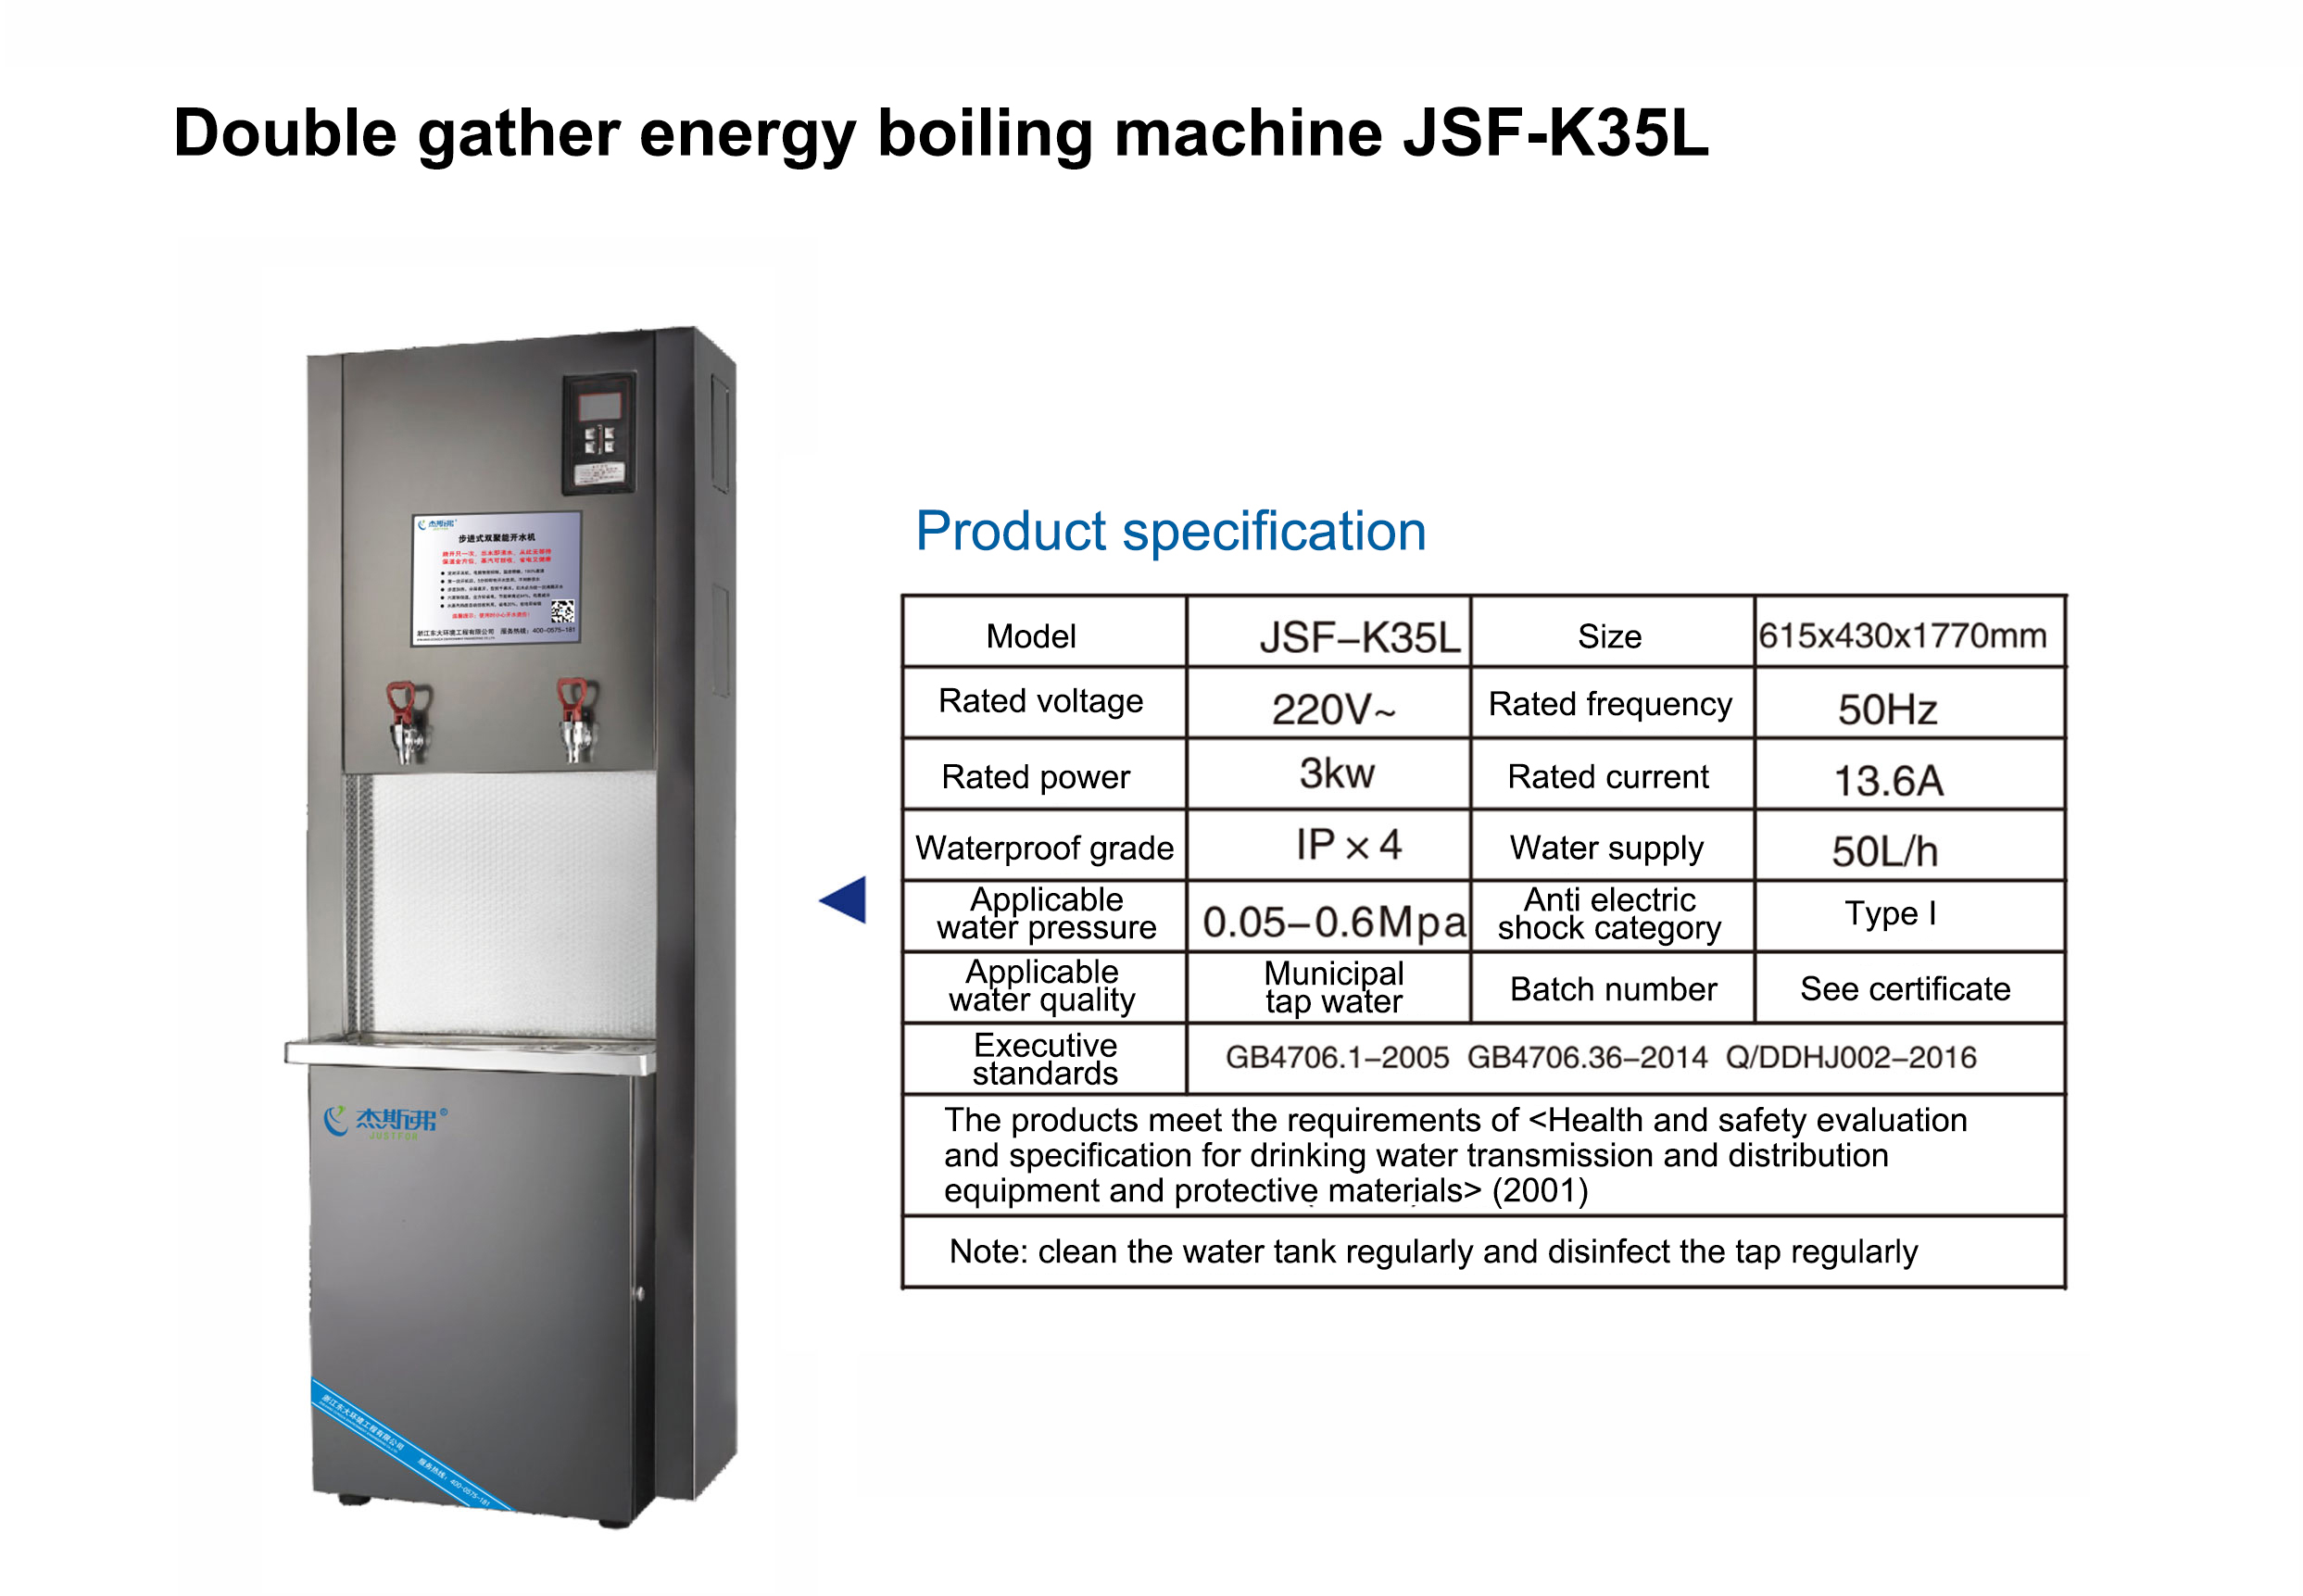 Double gather energy boiling machine（JSF-K35L）